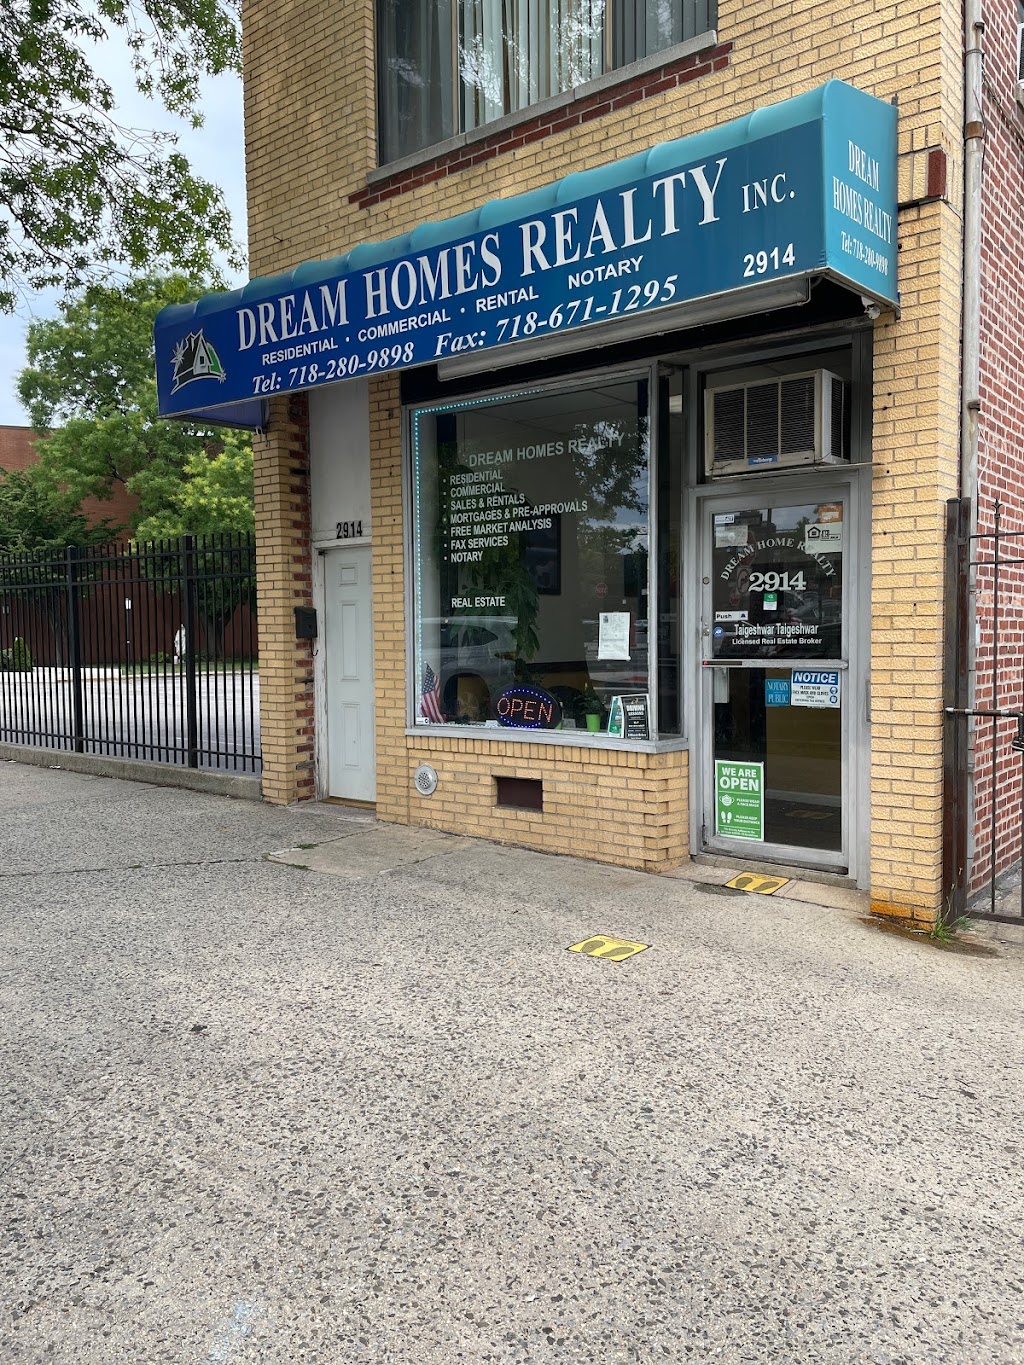 Global Dream Homes Realty Inc. | 2914 Eastchester Rd, The Bronx, NY 10469 | Phone: (718) 280-9898